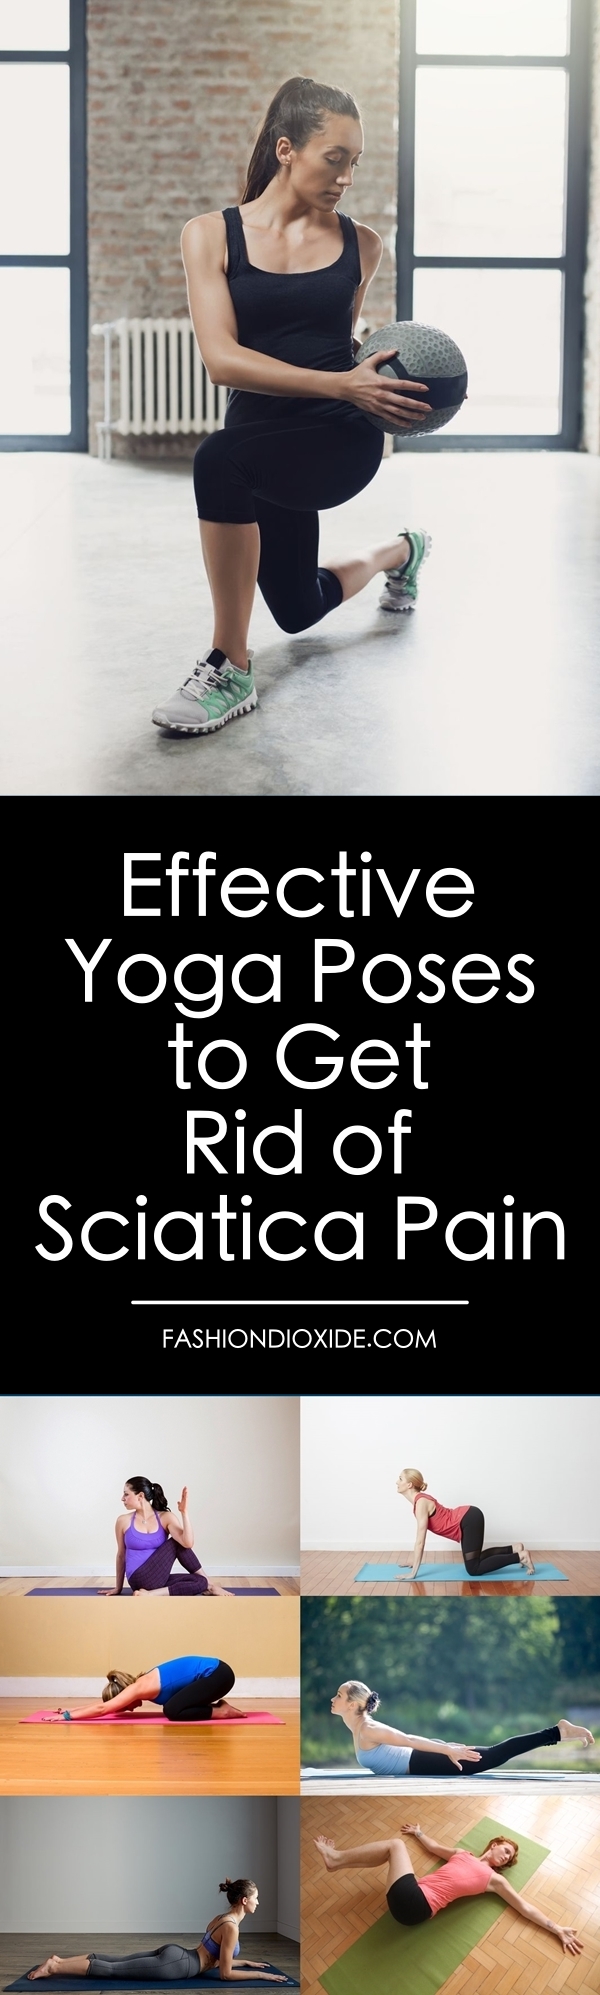 Effective-Yoga-Poses-to-Get-Rid-of-Sciatica-Pain